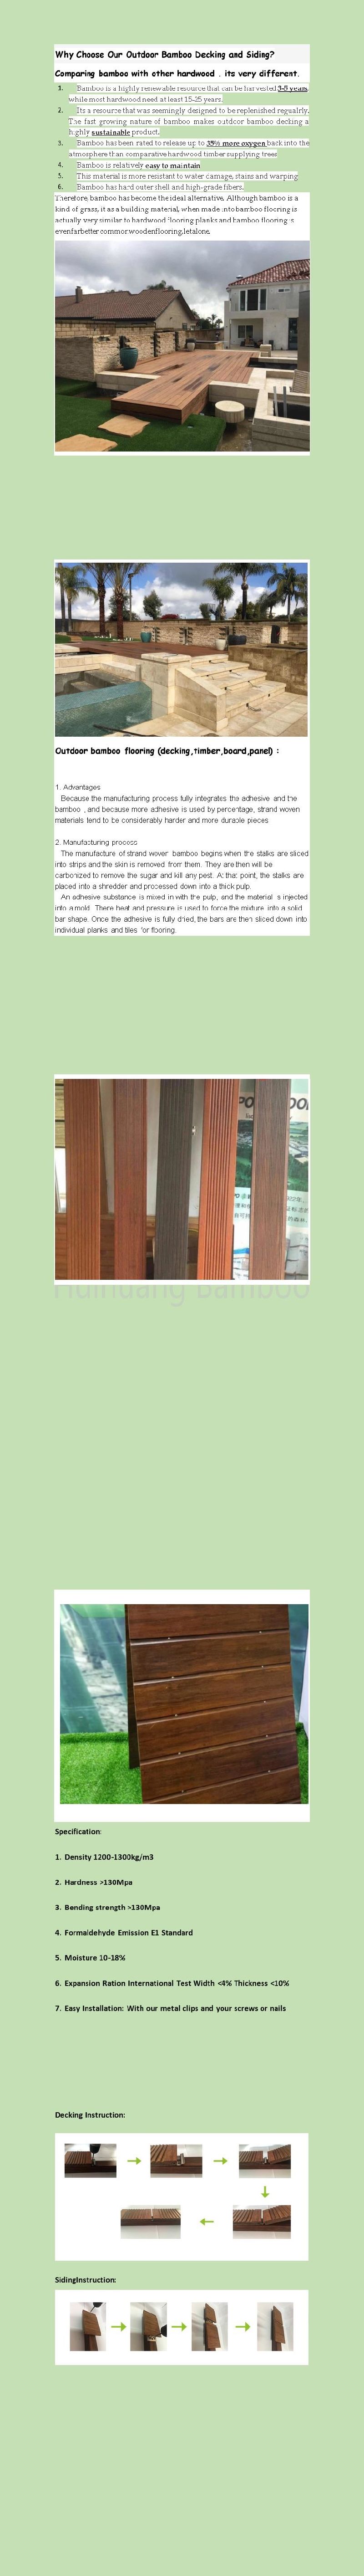 China Specialized Bamboo Decking Manufacturer with Huihuang Bamboo Decking Products